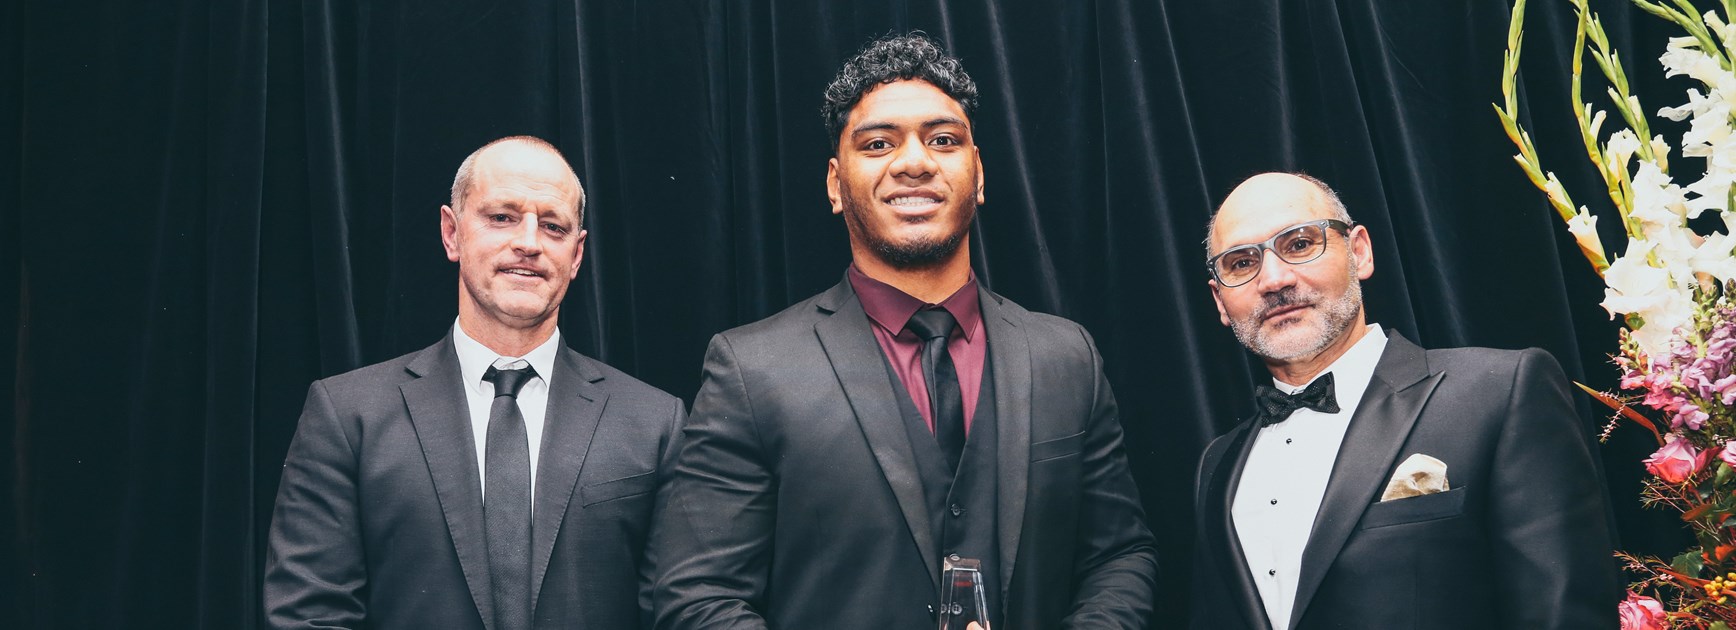 2019 Wests Tigers Rookie of the Year Thomas Mikaele